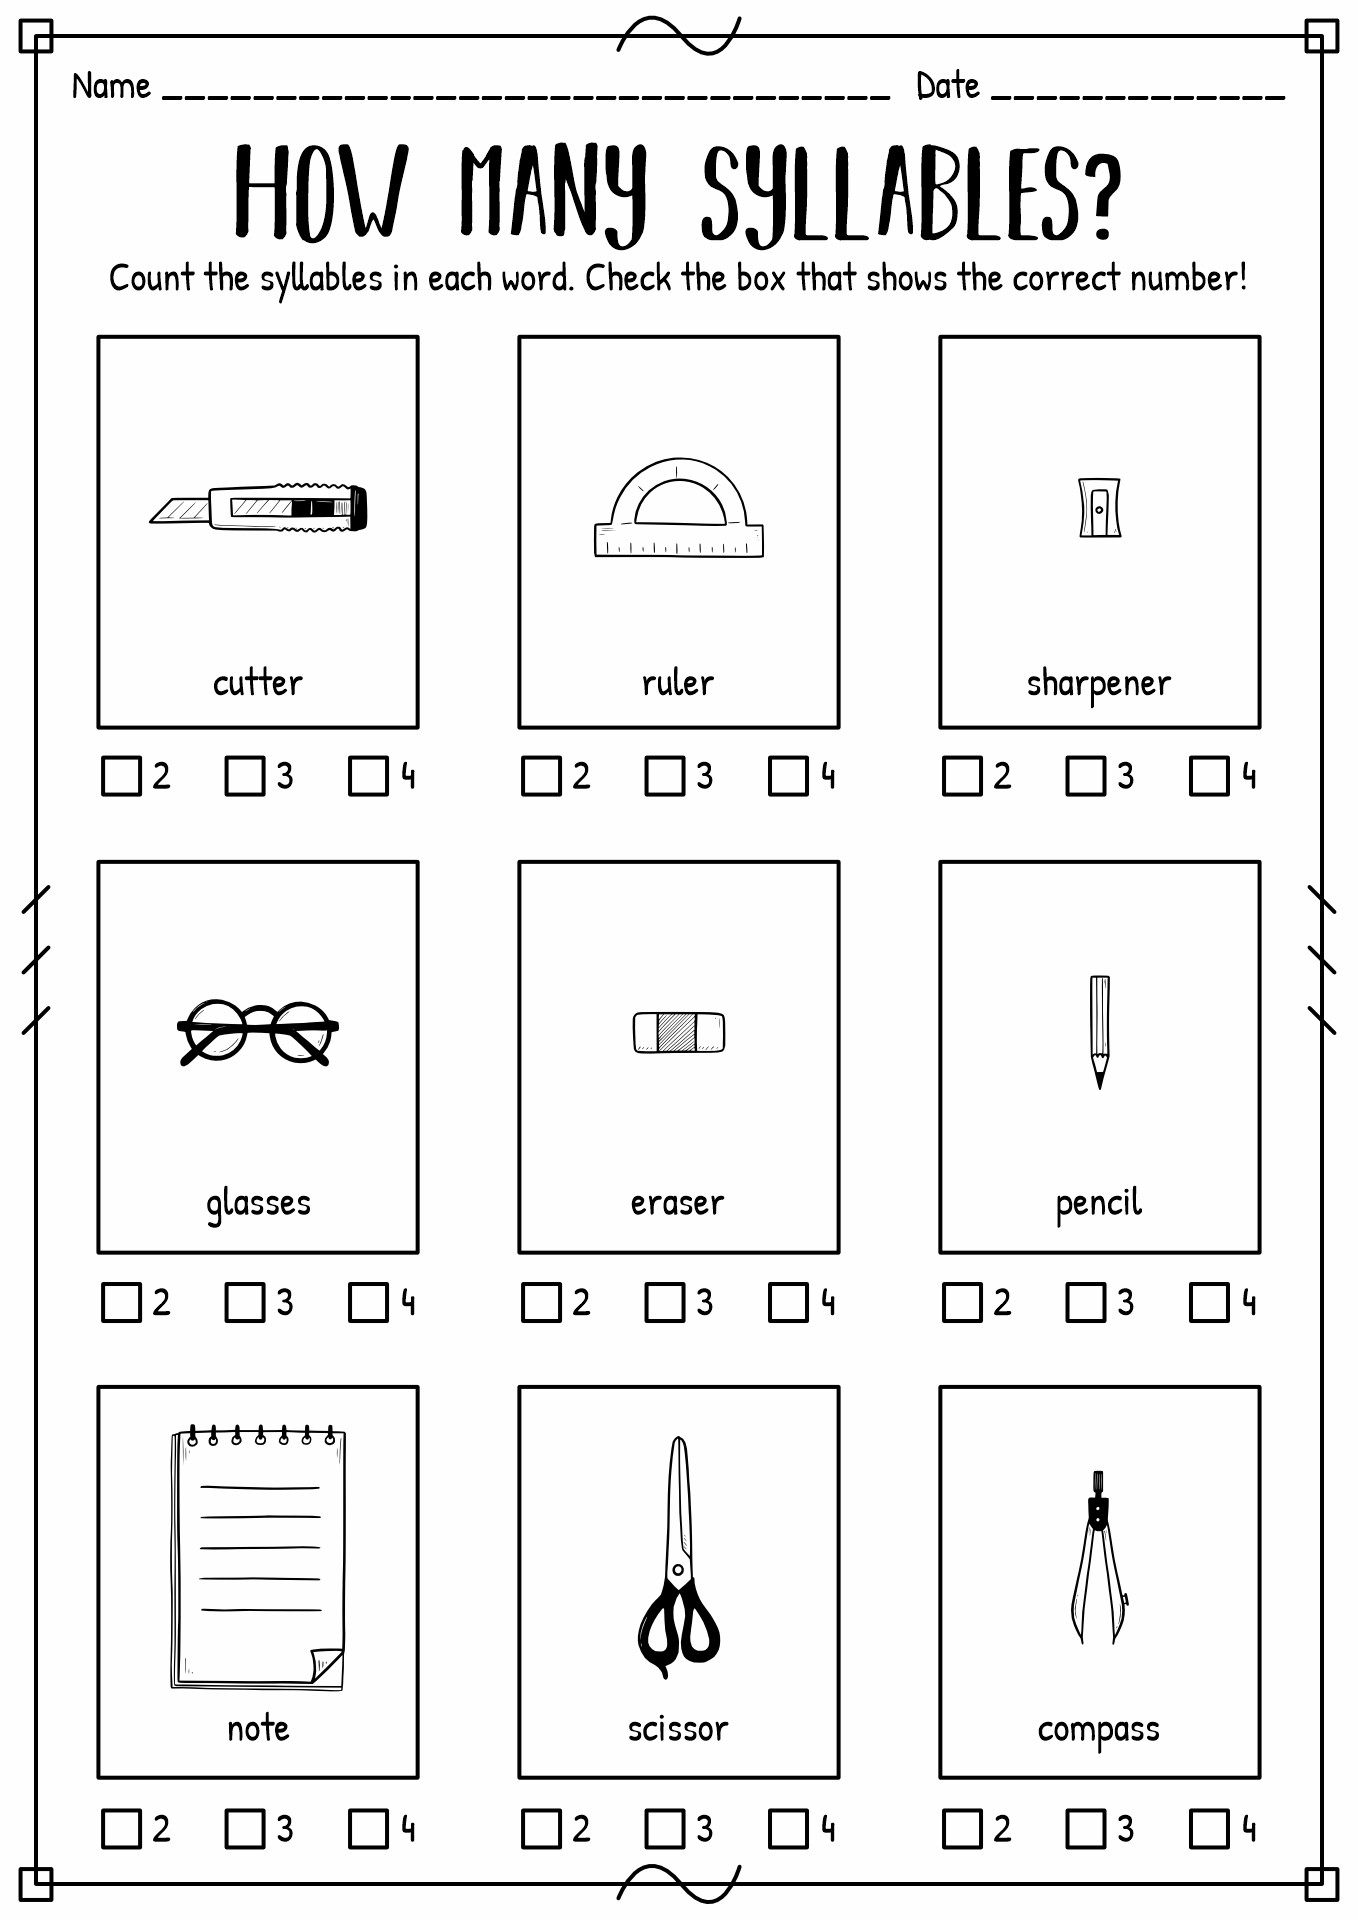 Syllables Worksheet For 1st Grade